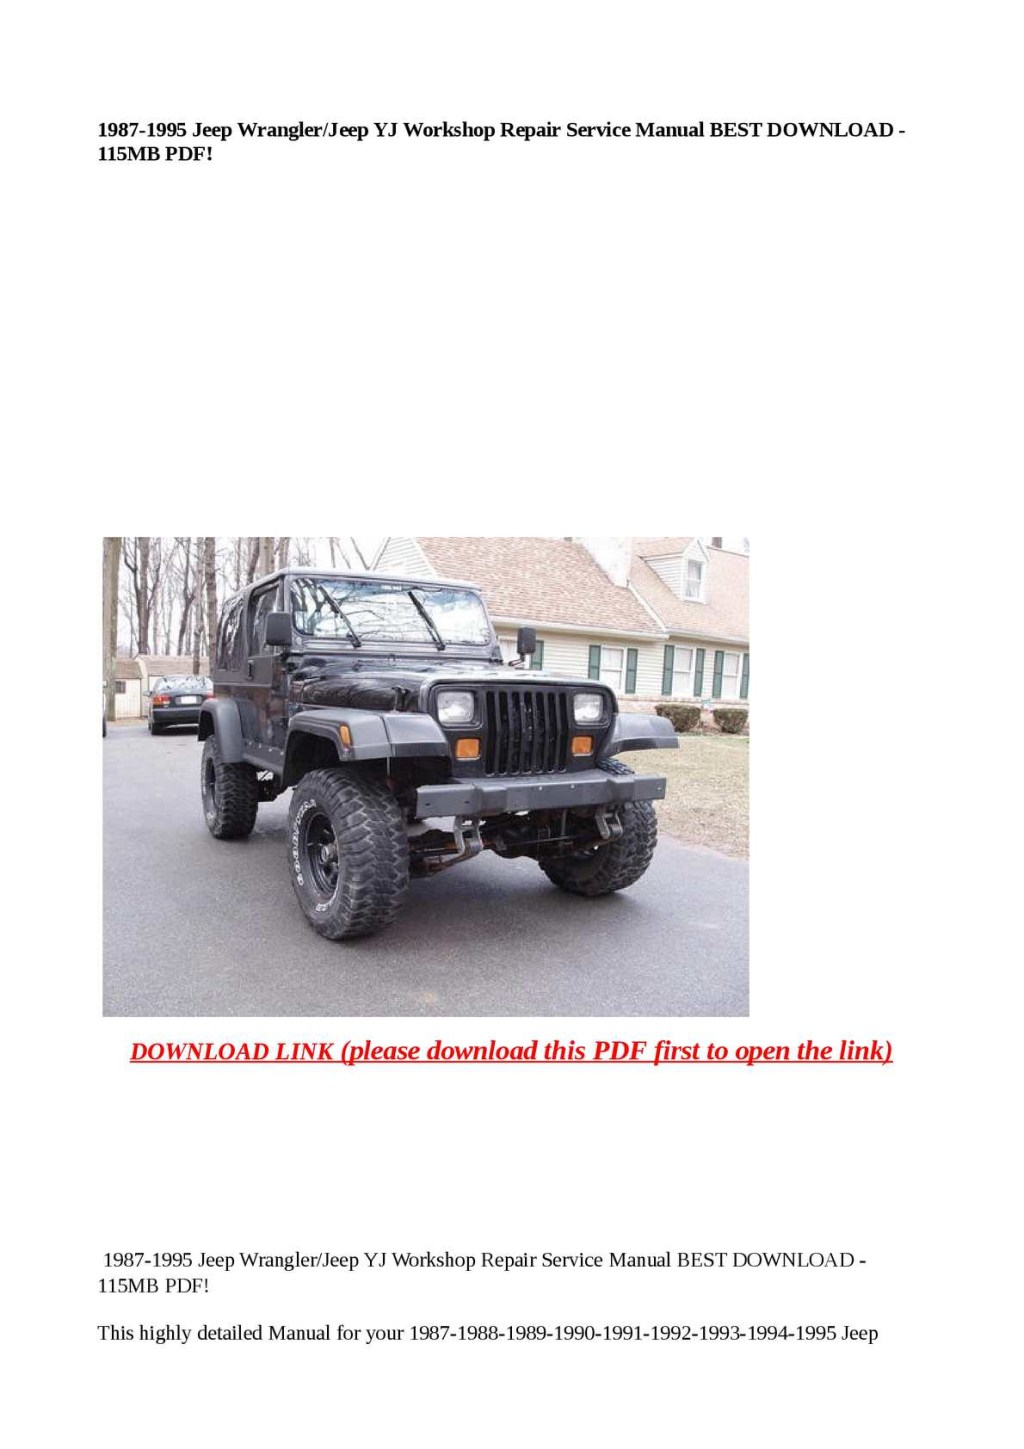 Picture of: Calaméo – – Jeep Wrangler/Jeep YJ Workshop Repair Service